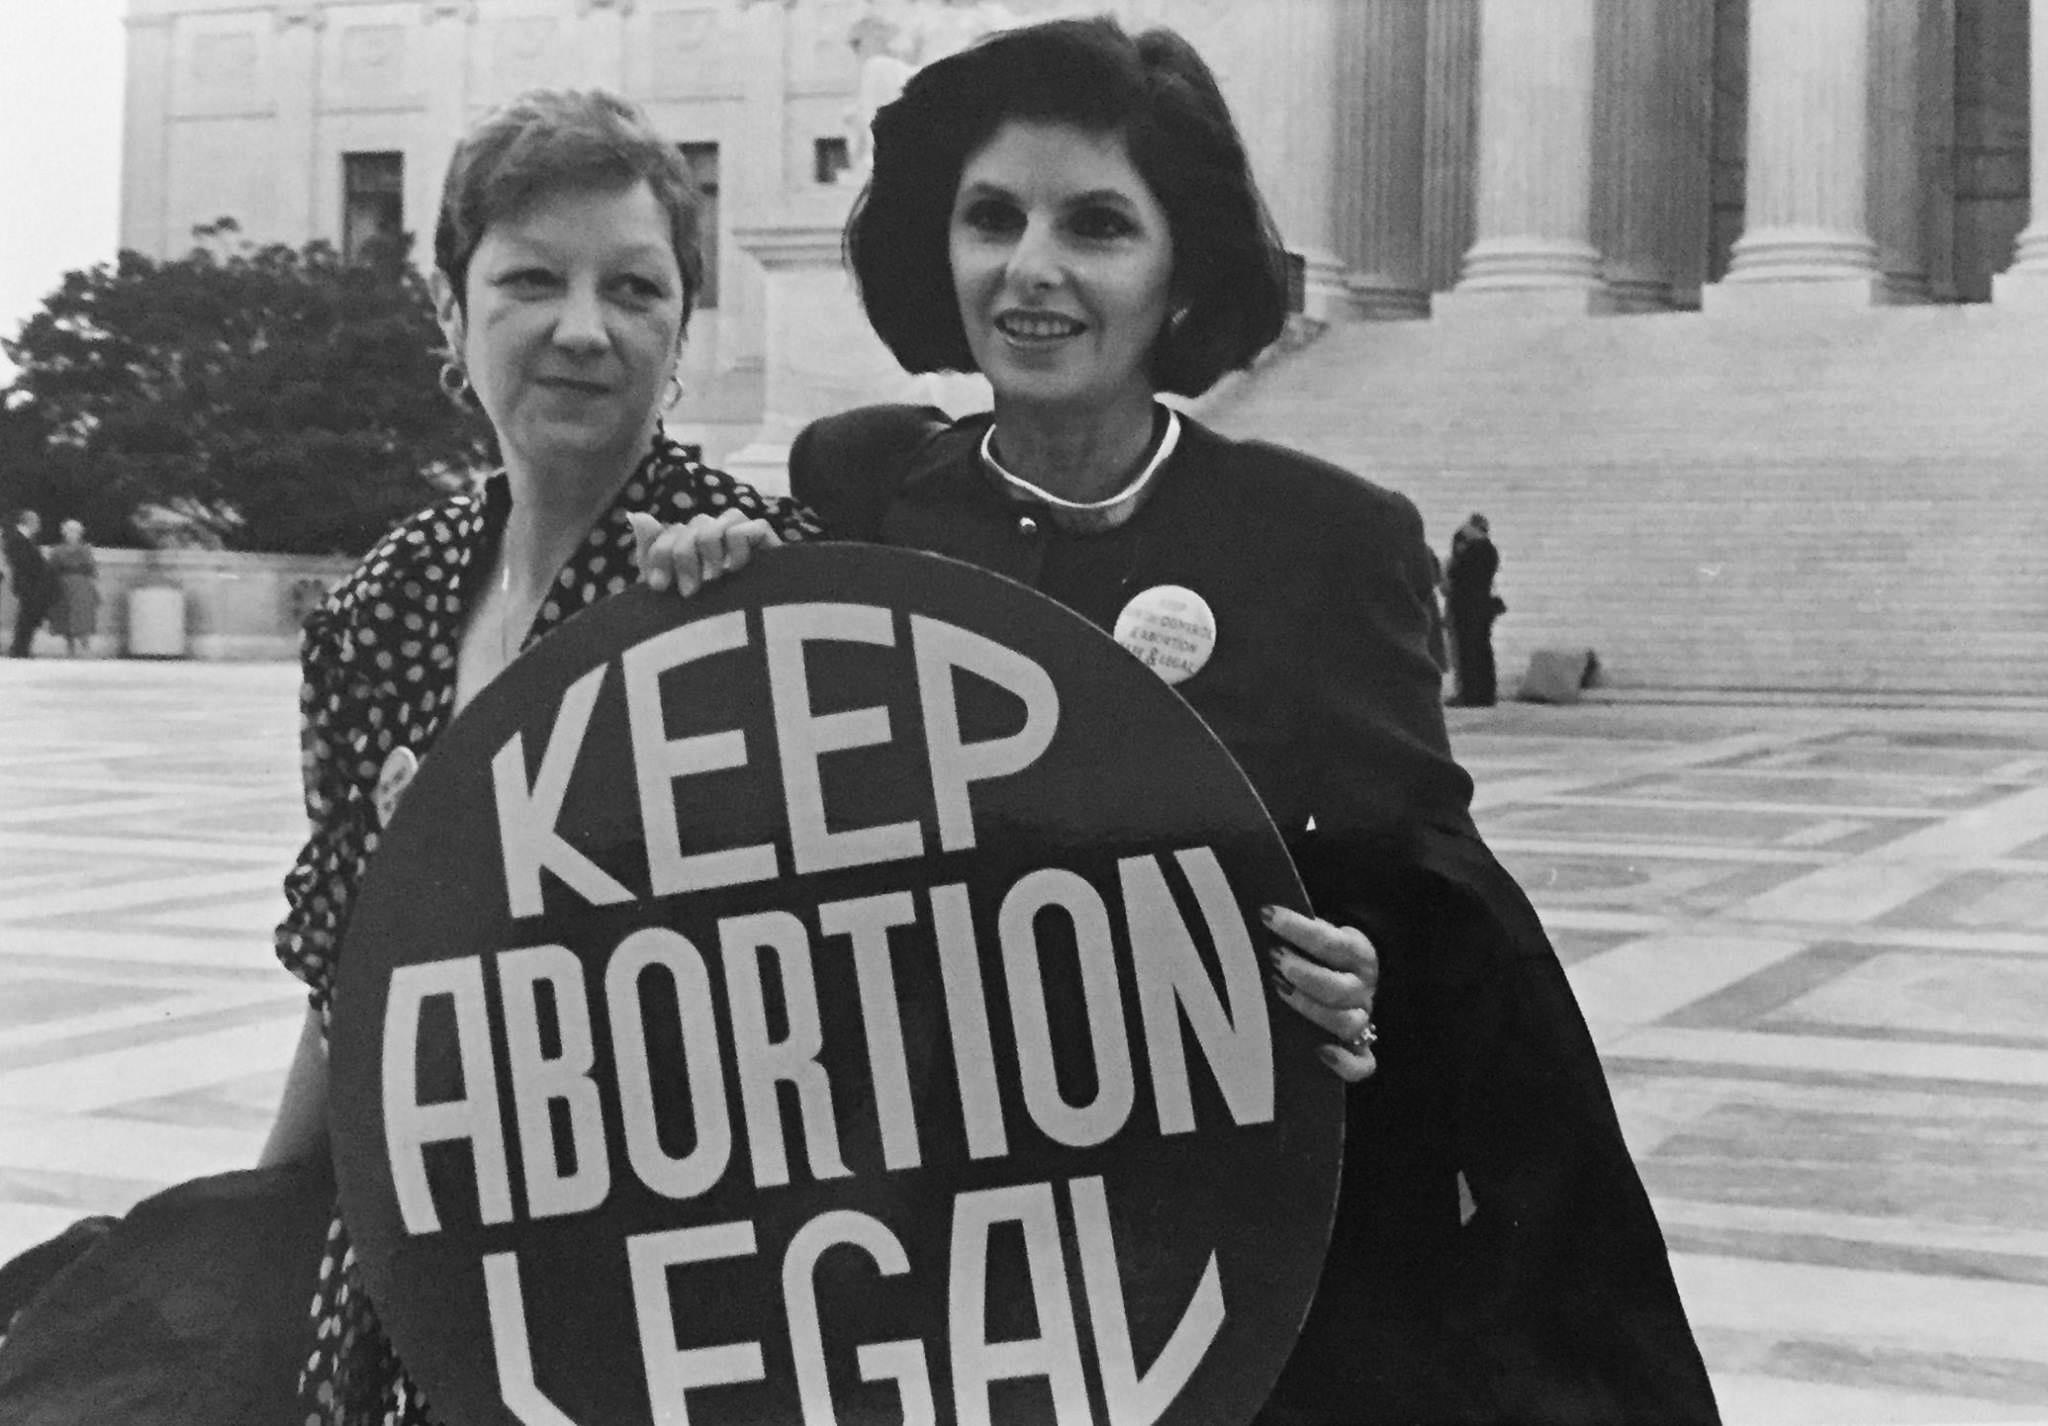 Poll Finds More Catholics Want Supreme Court to Uphold Roe v. Wade Rather Than Reverse It